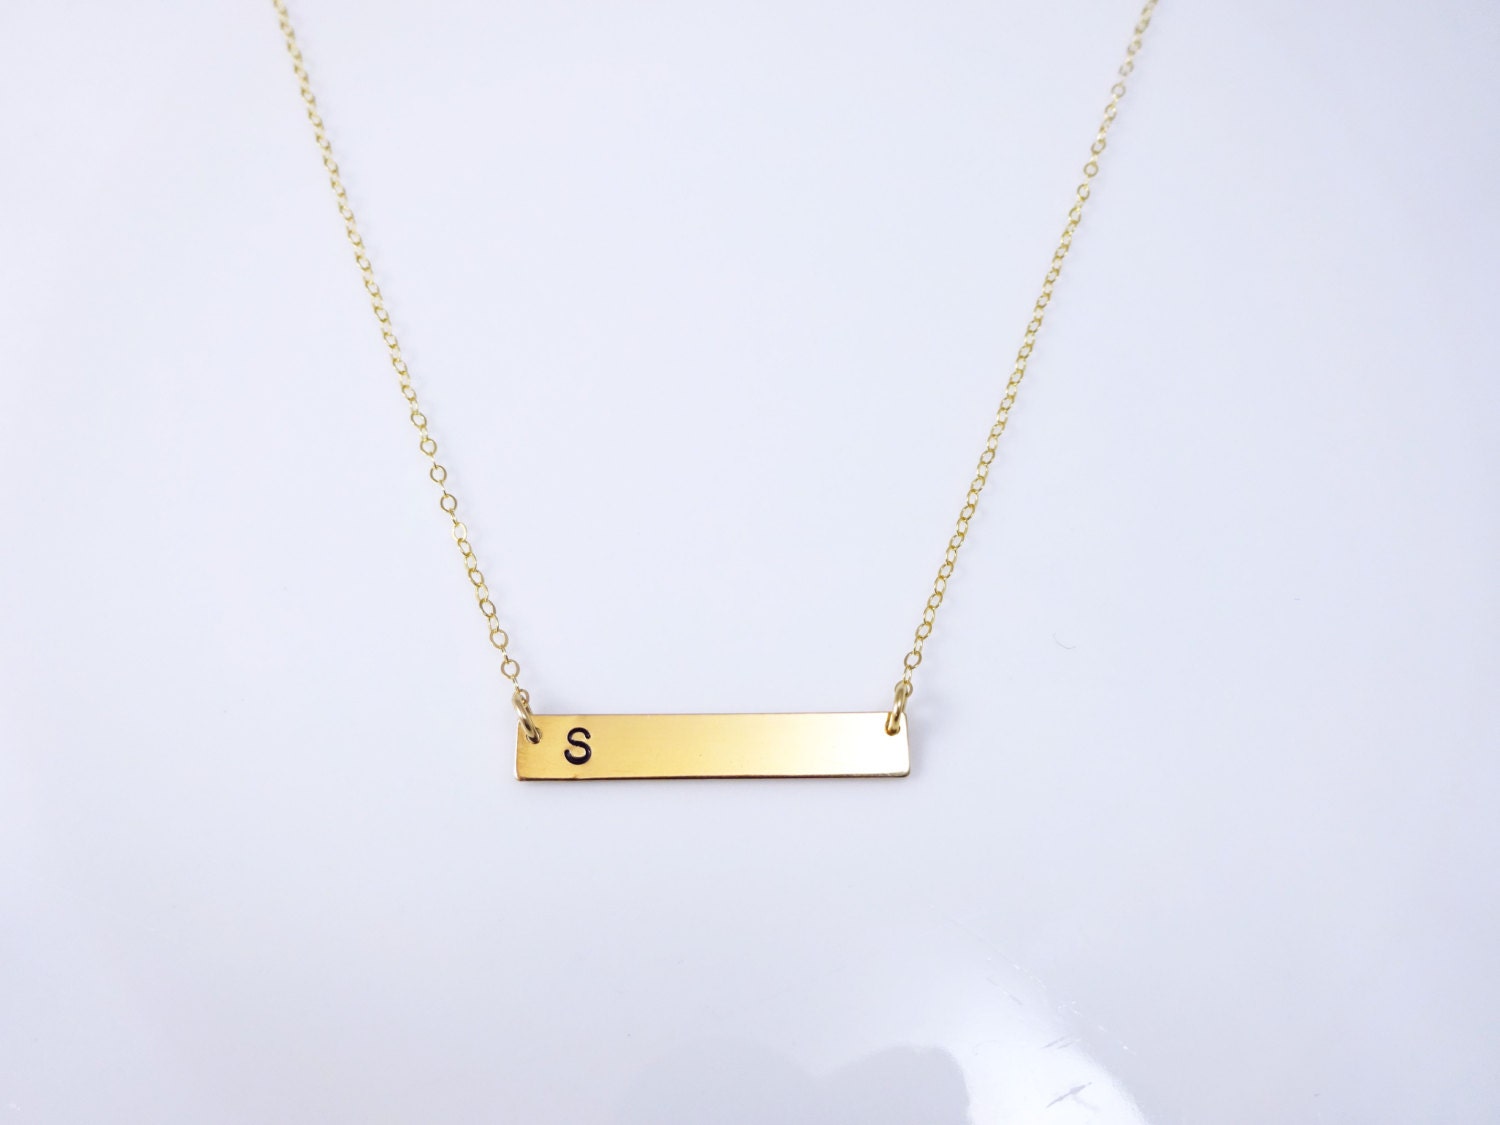 Personalized Gold Bar necklace, gold bar charm with stamped initial, 14k gold fill, minimal gold layering necklace, modern, Bridesmaid gift